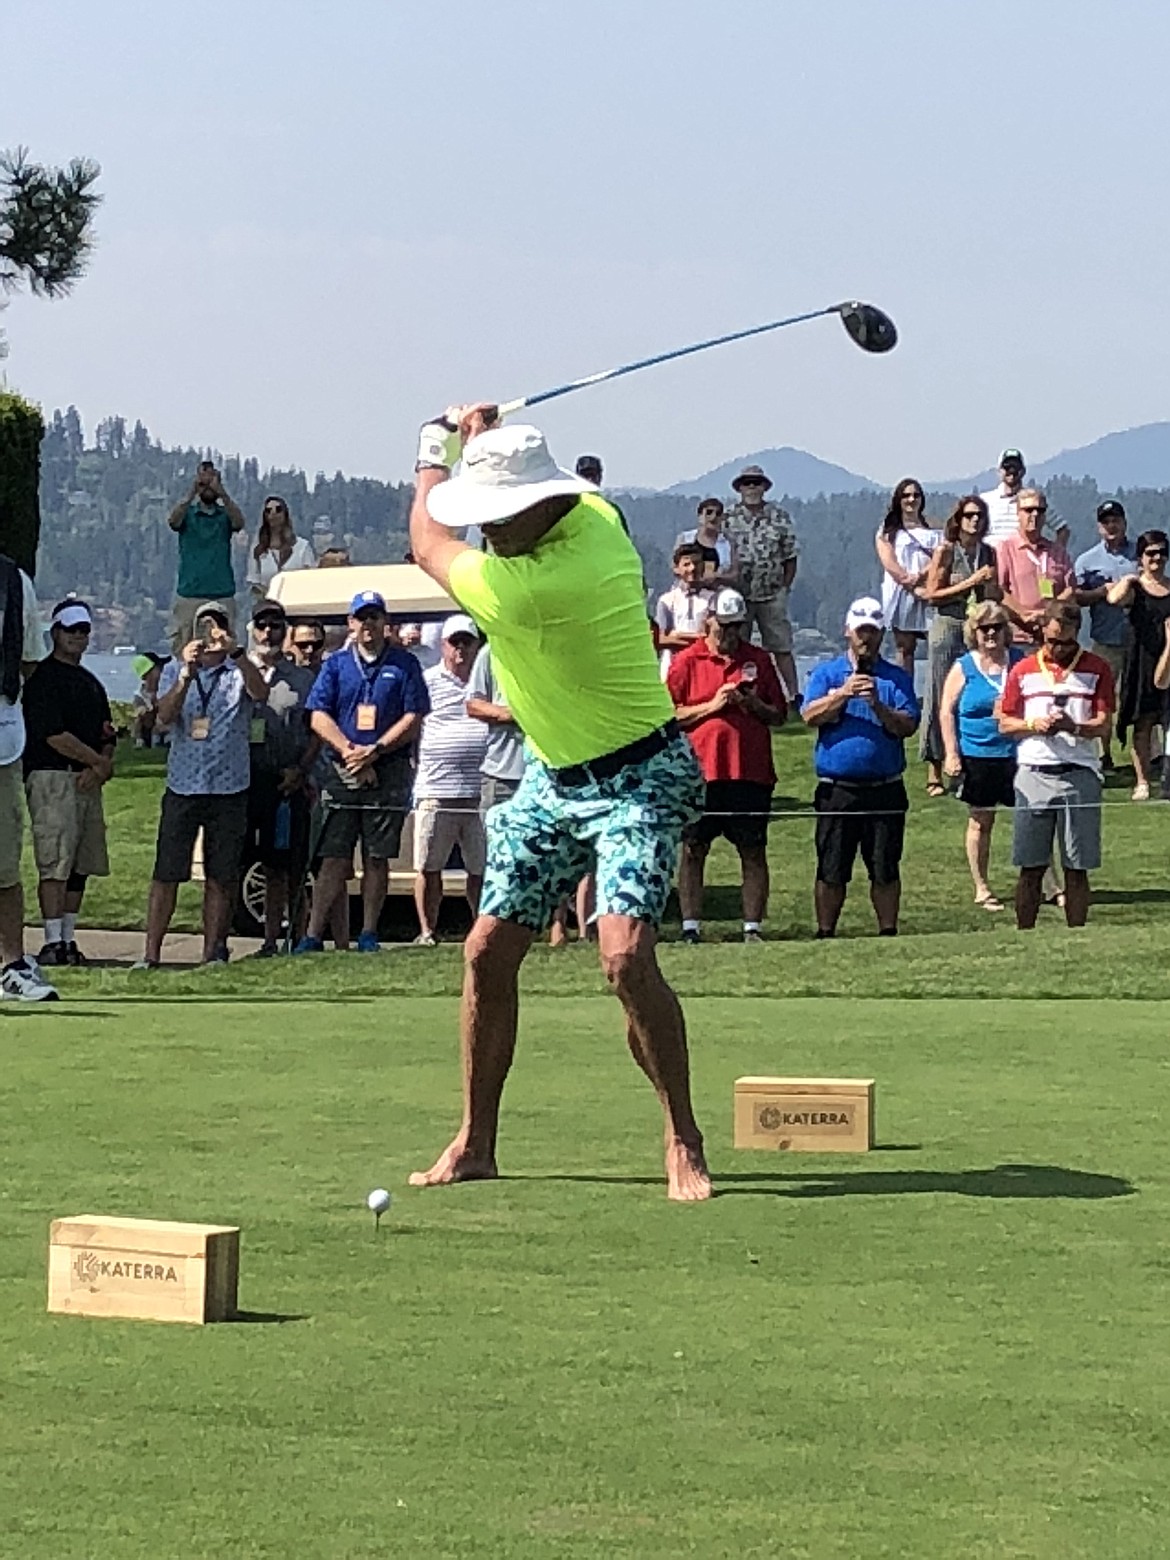 JASON ELLIOTT/Press
Former Chicago Bears quarterback Jim McMahon &#151; yes, playing barefoot &#151; prepares to hit his tee shot to open Saturday&#146;s round at The Showcase golf exhibition at The Coeur d&#146;Alene Resort Golf Course.